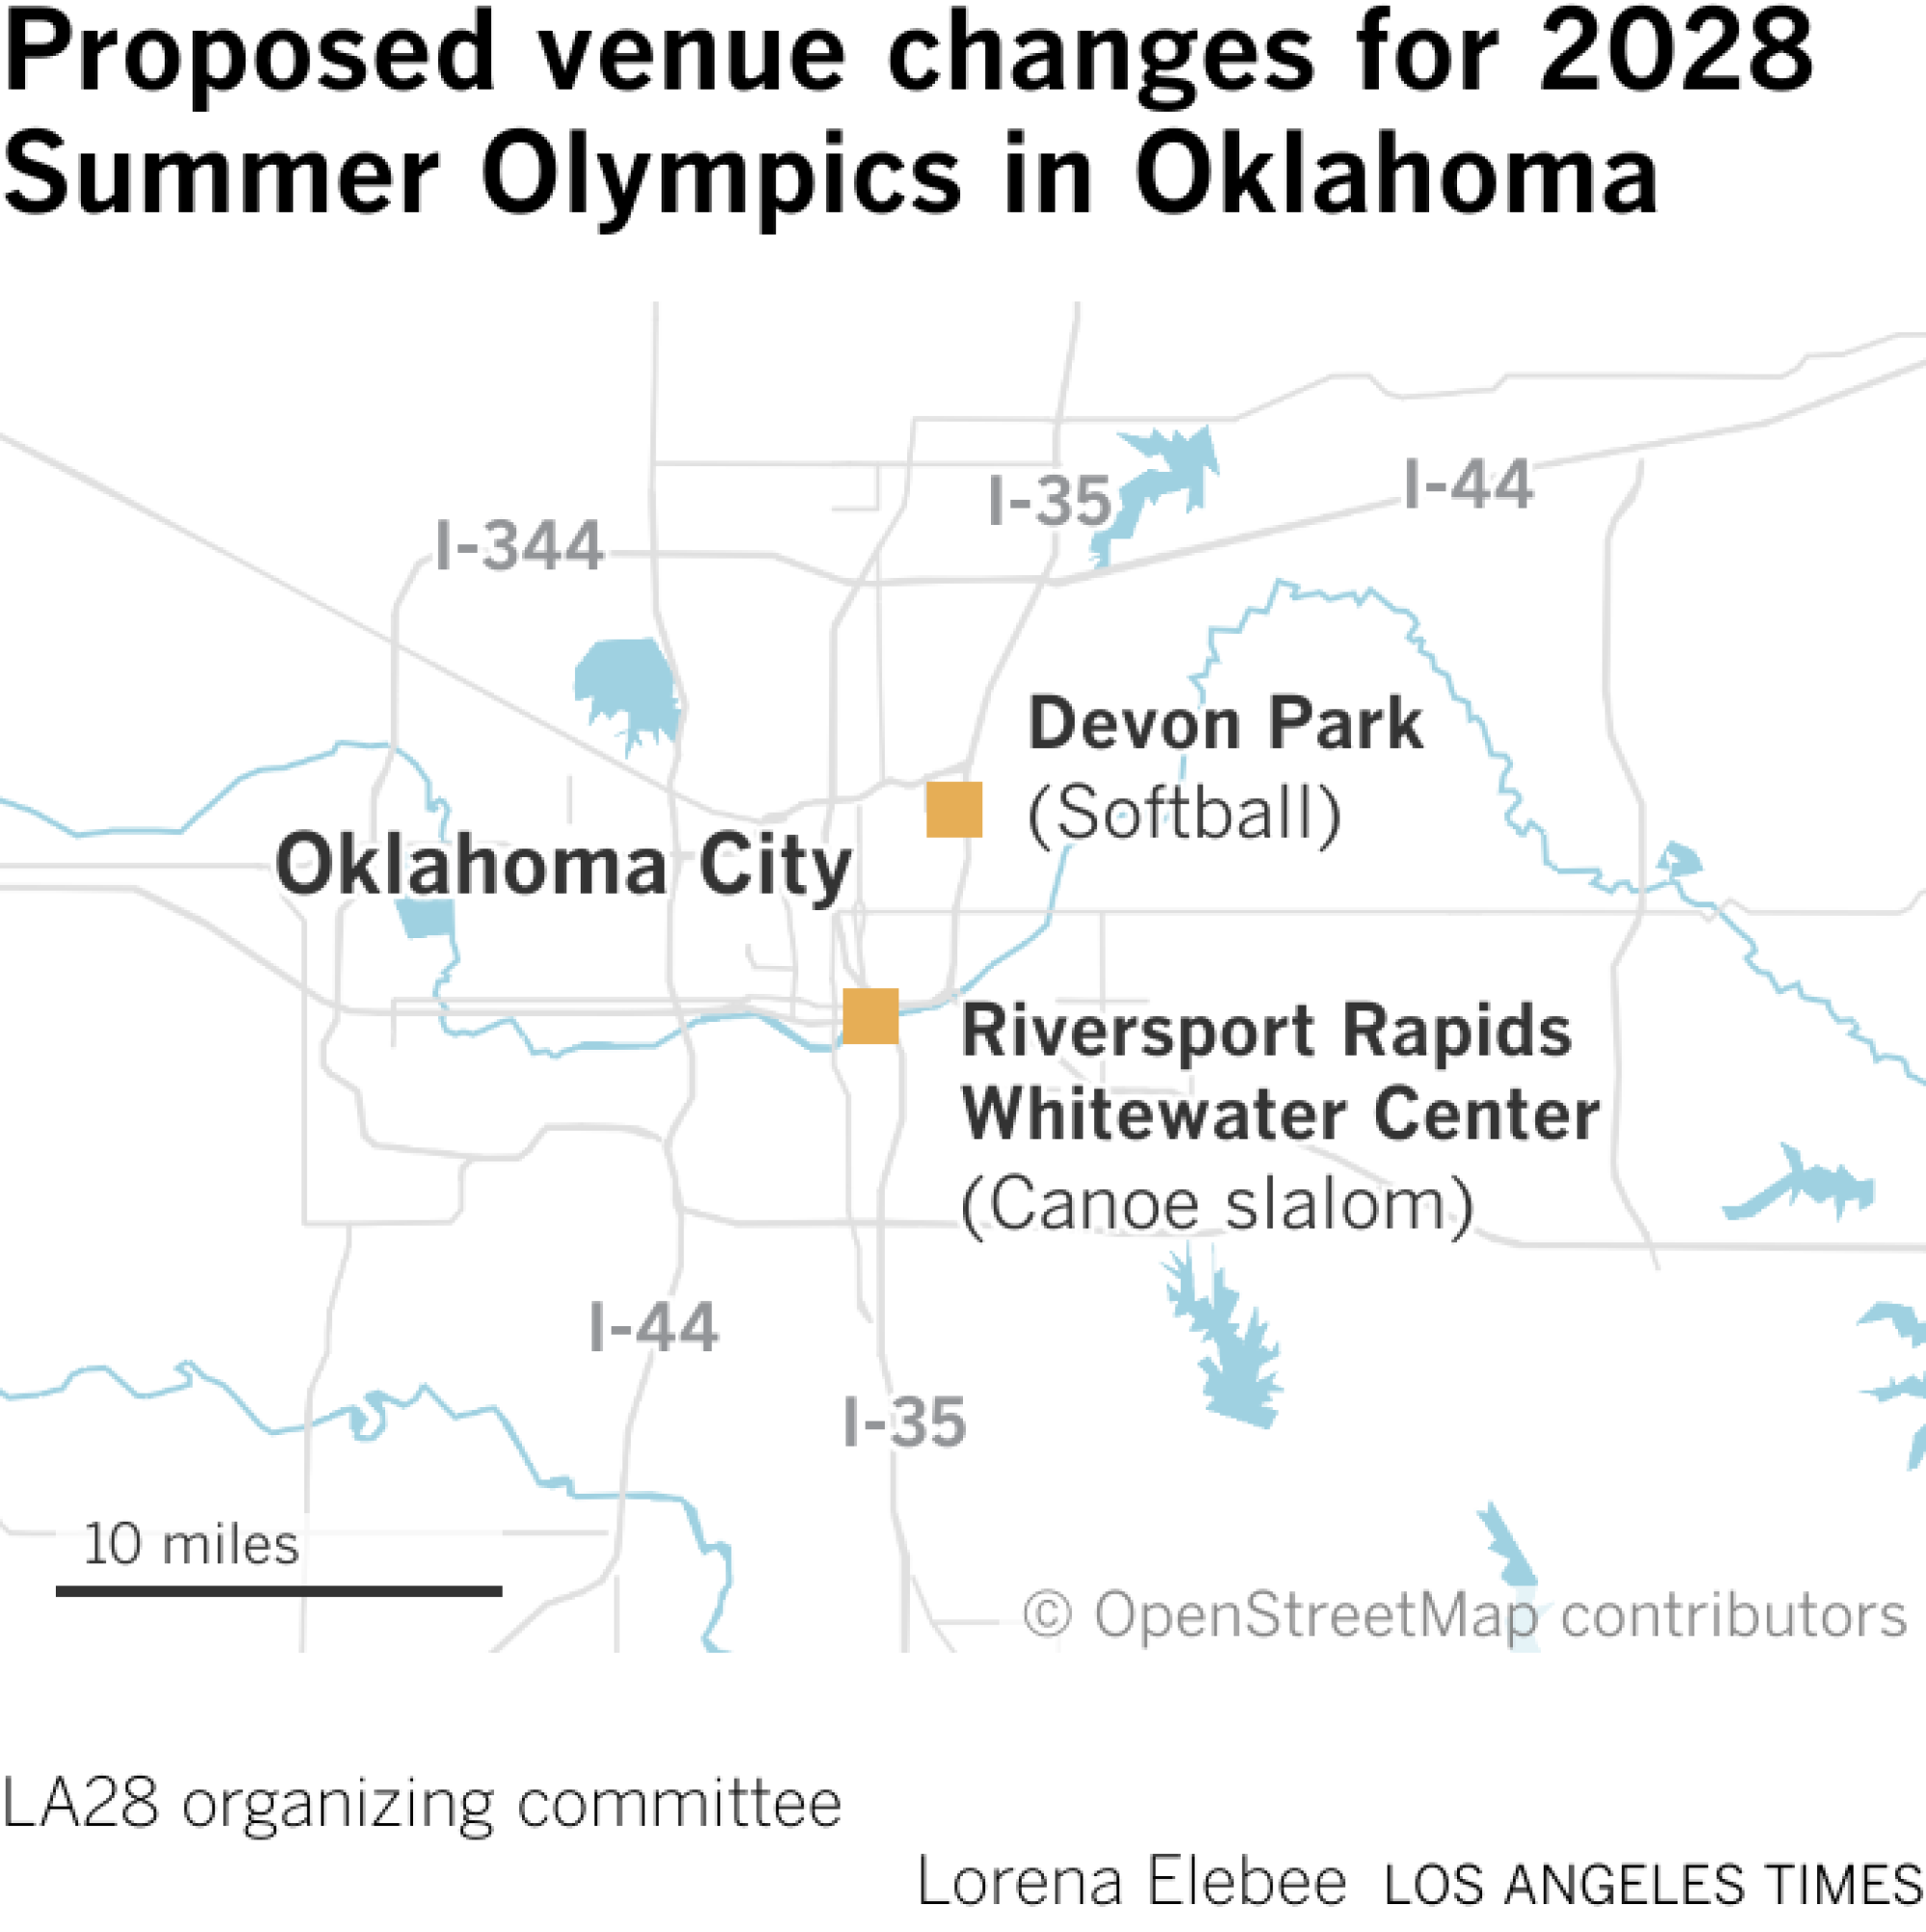 Map showing proposed venue changes for 2028 Summer Olympics in Oklahoma City.